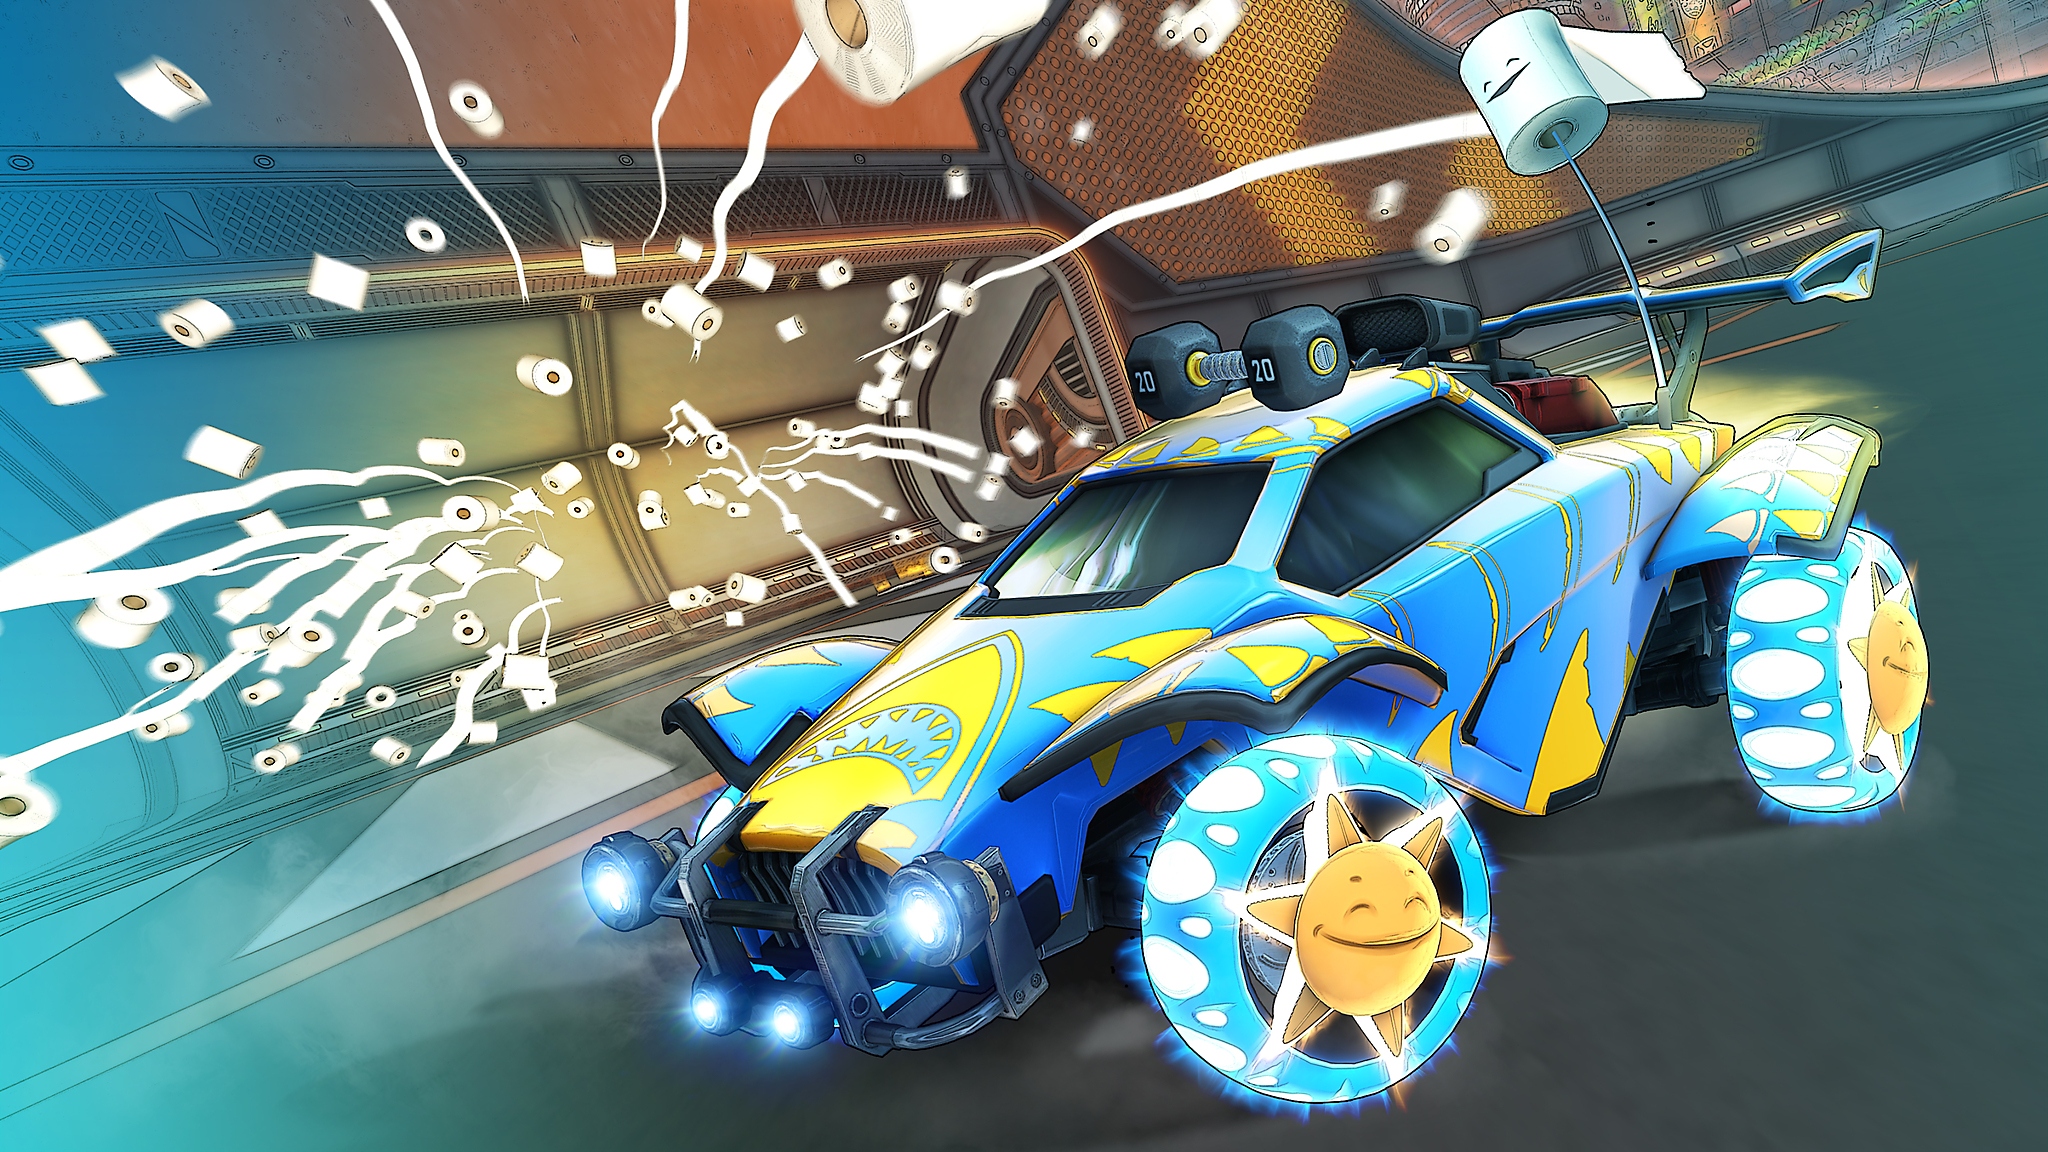 Rocket League - Season 6 screenshot showing a blue and yellow car with many toilet rolls being thrown through the air